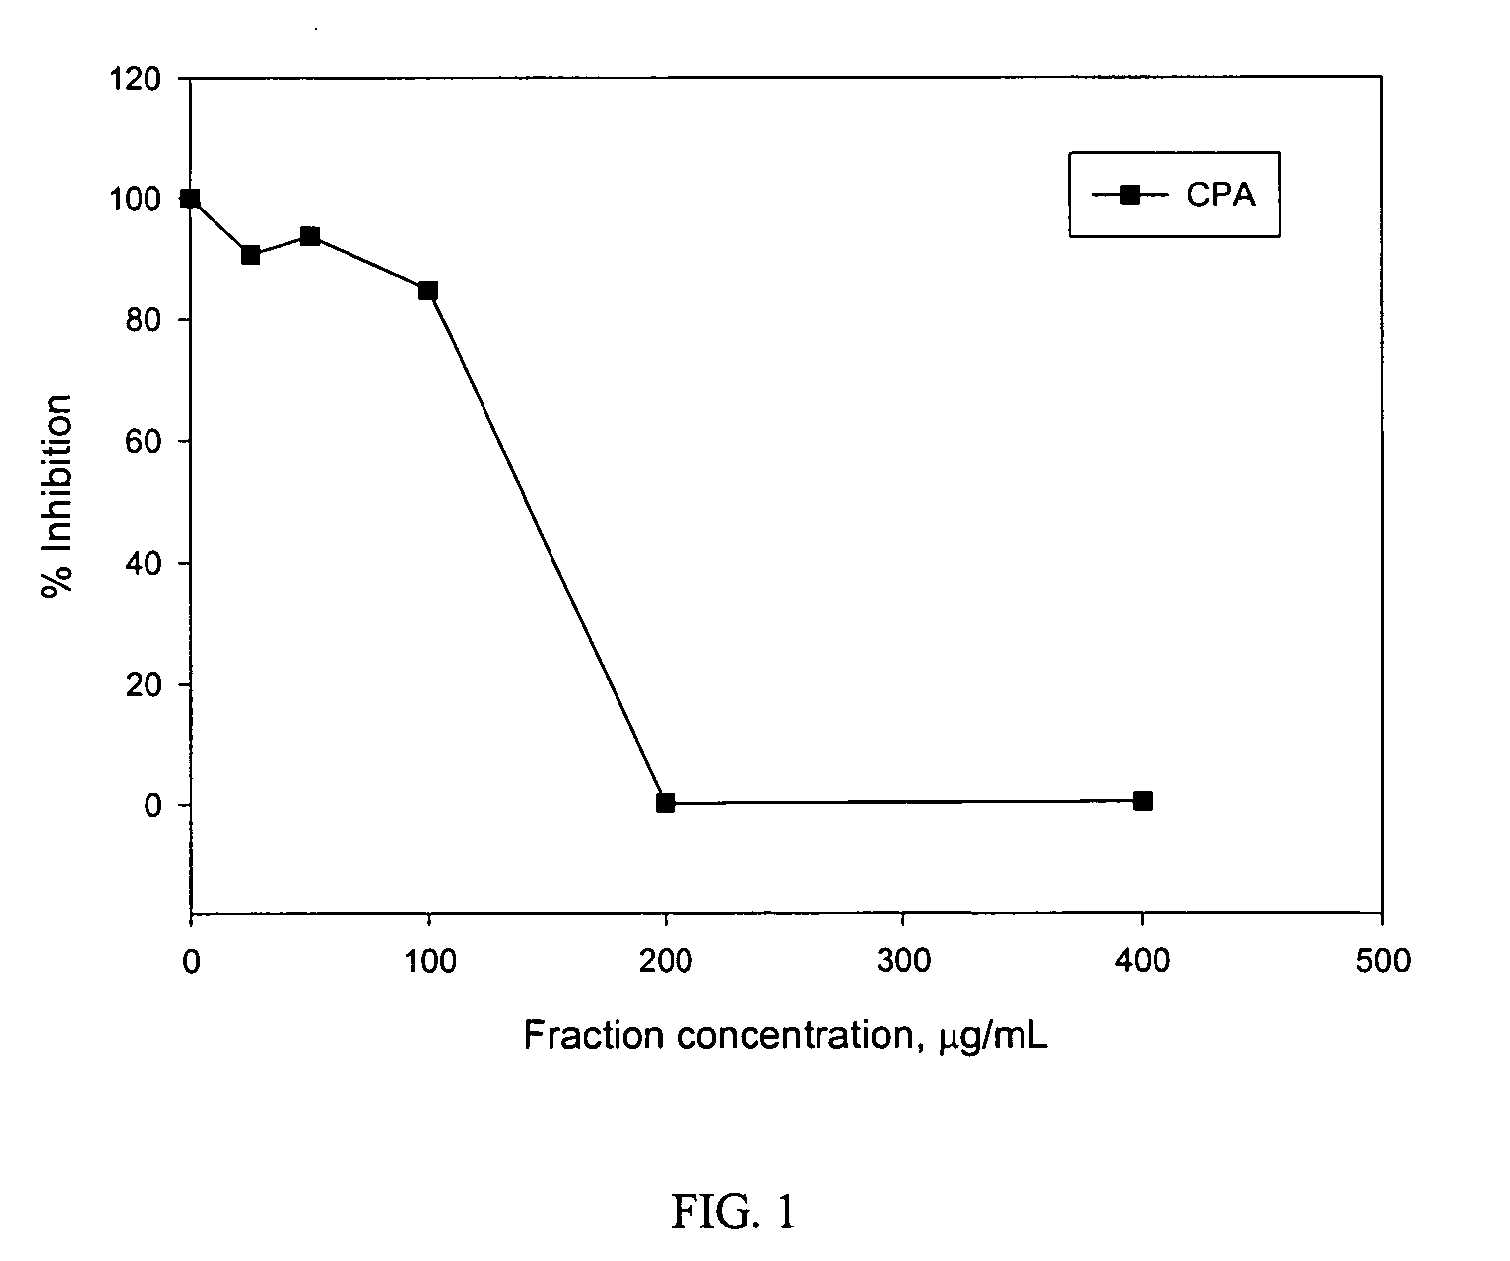 Canola Extracts Containing High Levels of Phenolic Acids